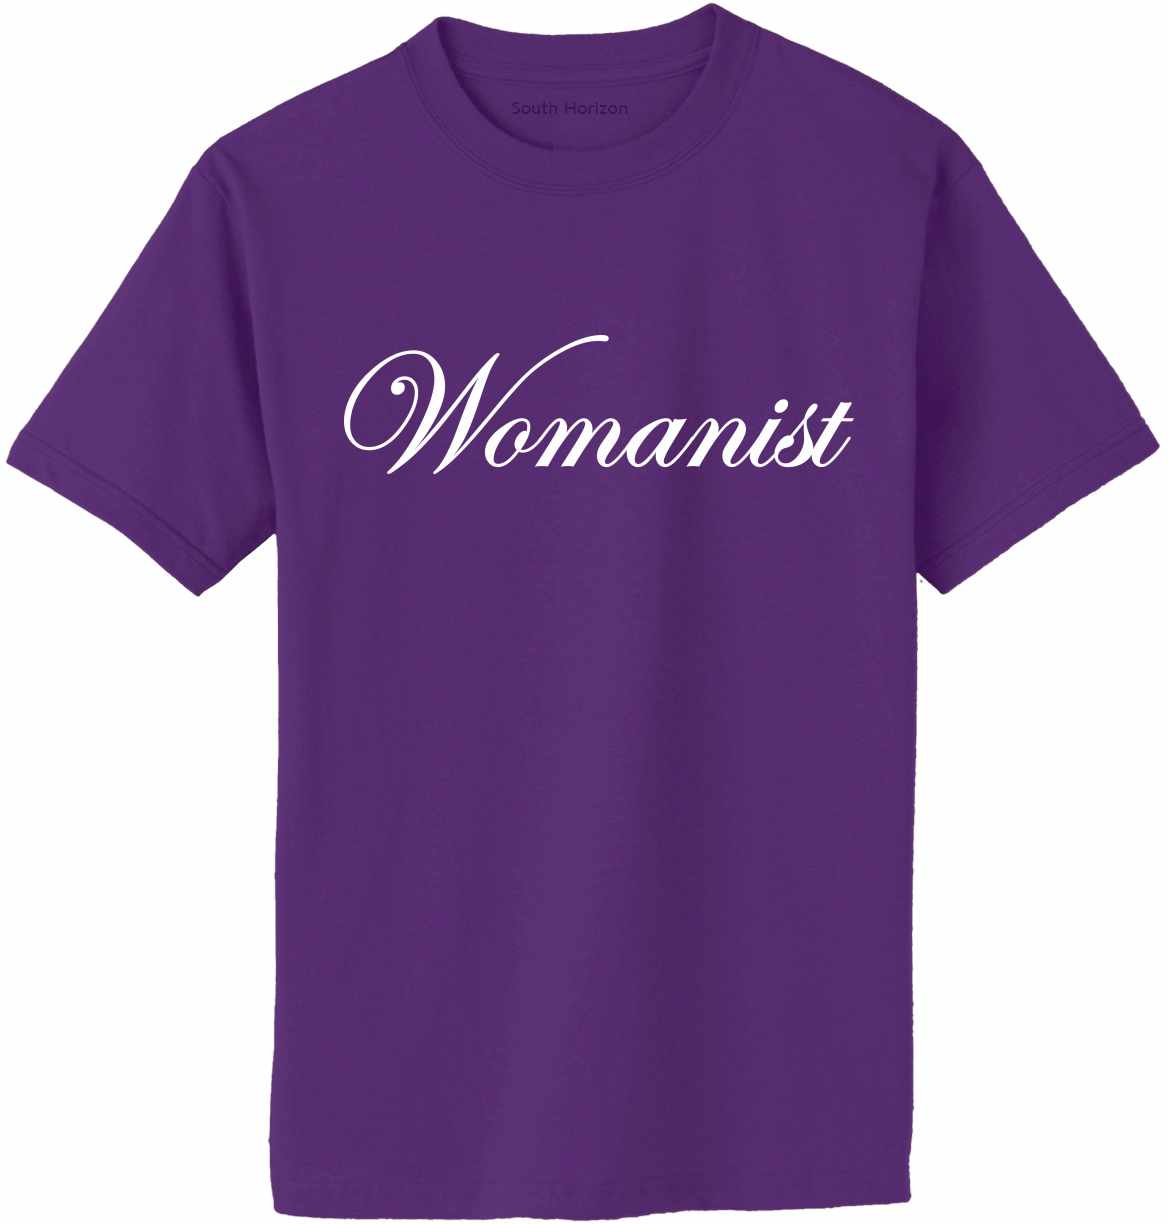 Womanist on Adult T-Shirt (#1222-1)